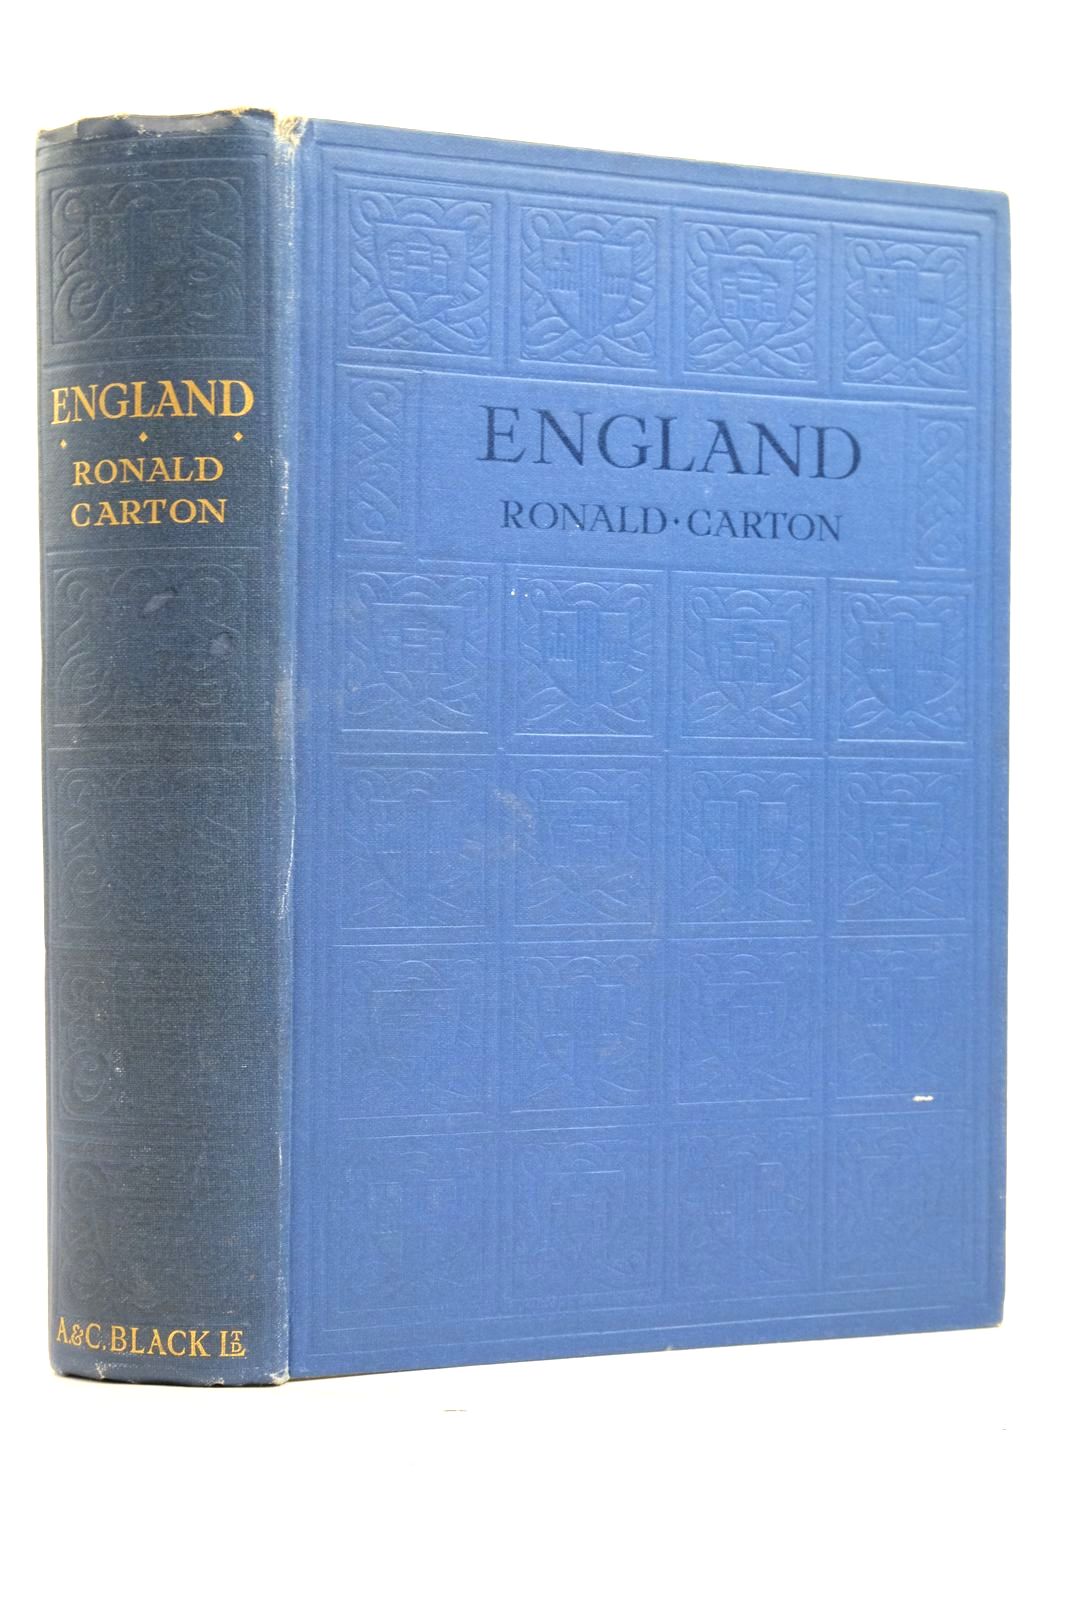 Photo of ENGLAND- Stock Number: 2137019